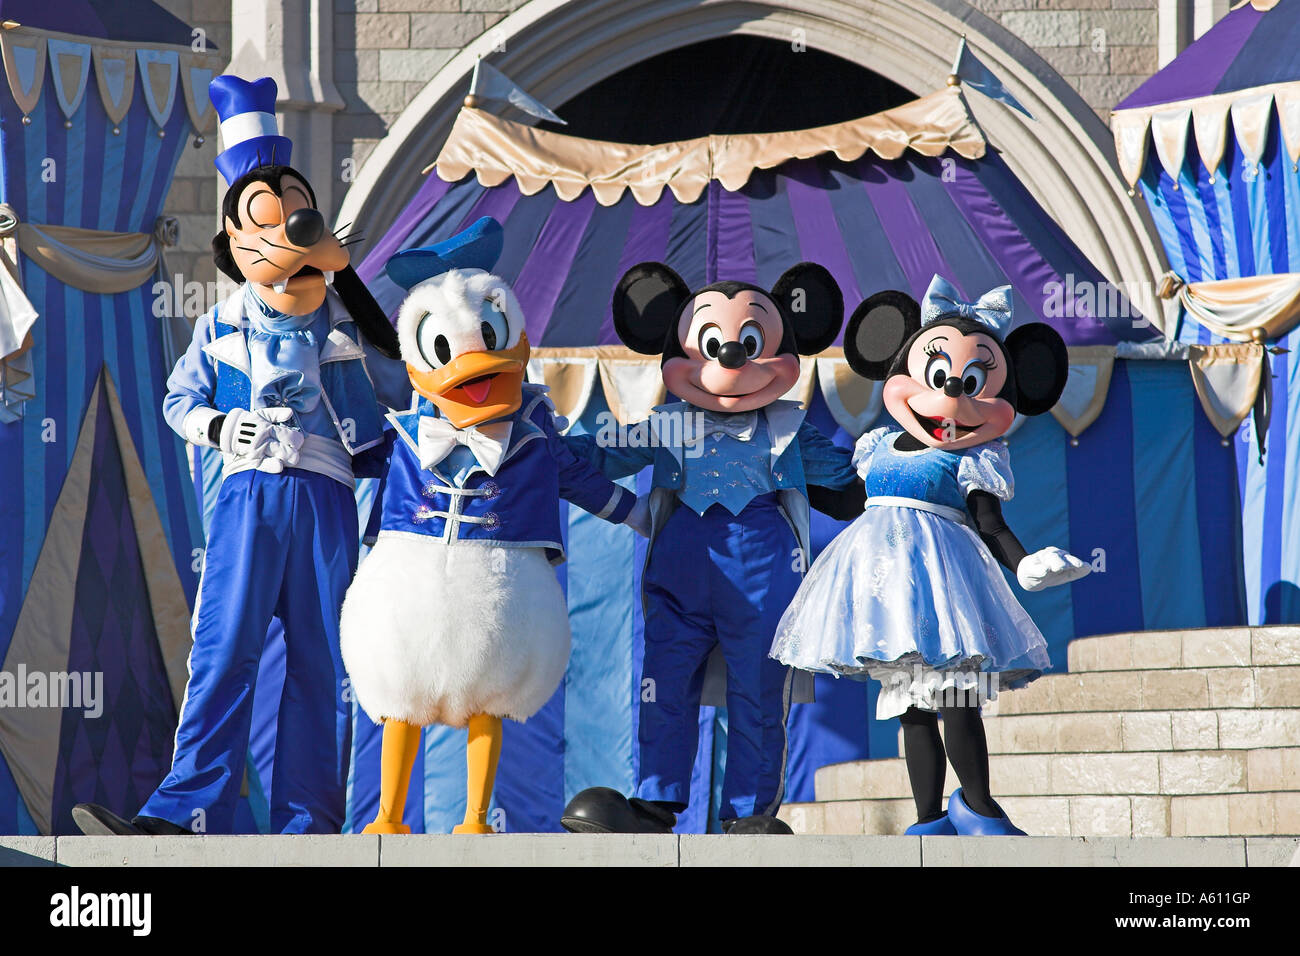 Mickey and Minnie Mouse on stage with Goofy and Donald Duck, Magic Kingdom, Orlando, Florida, USA Stock Photo